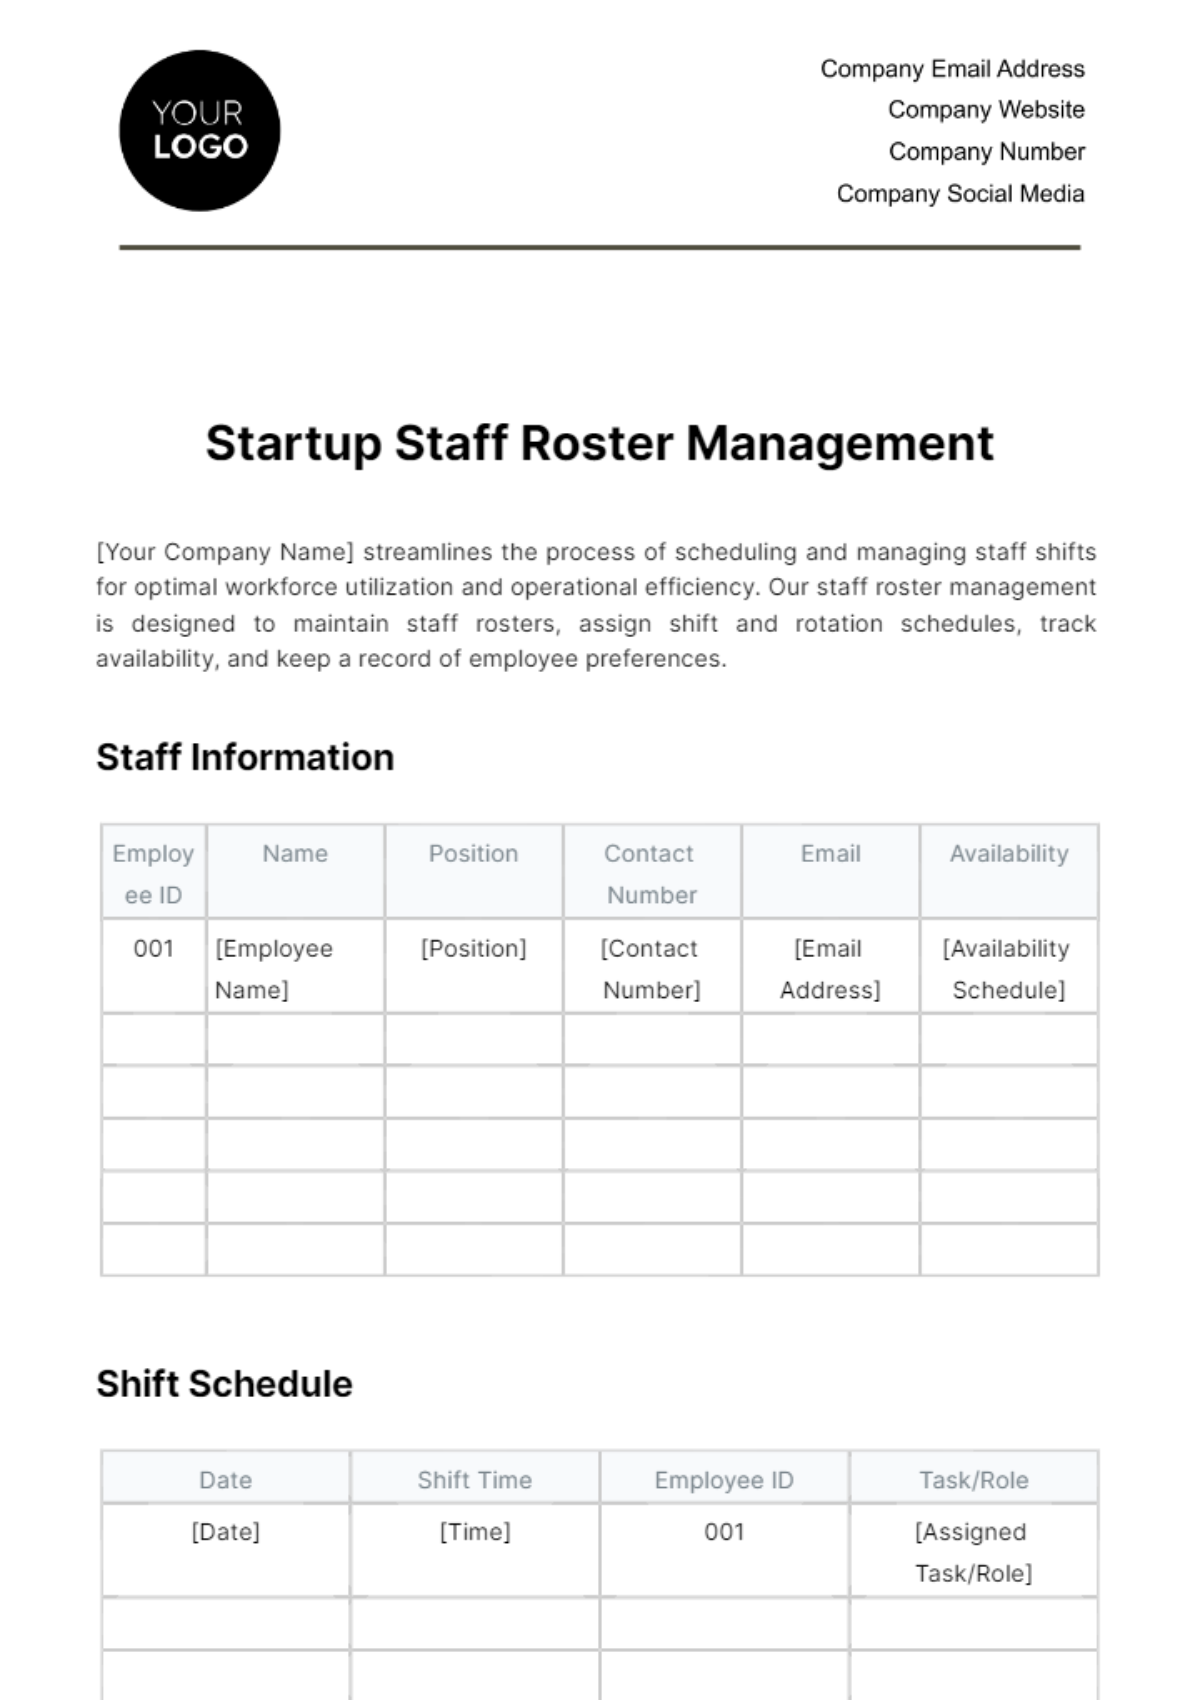 Free Startup Staff Roster Management Template